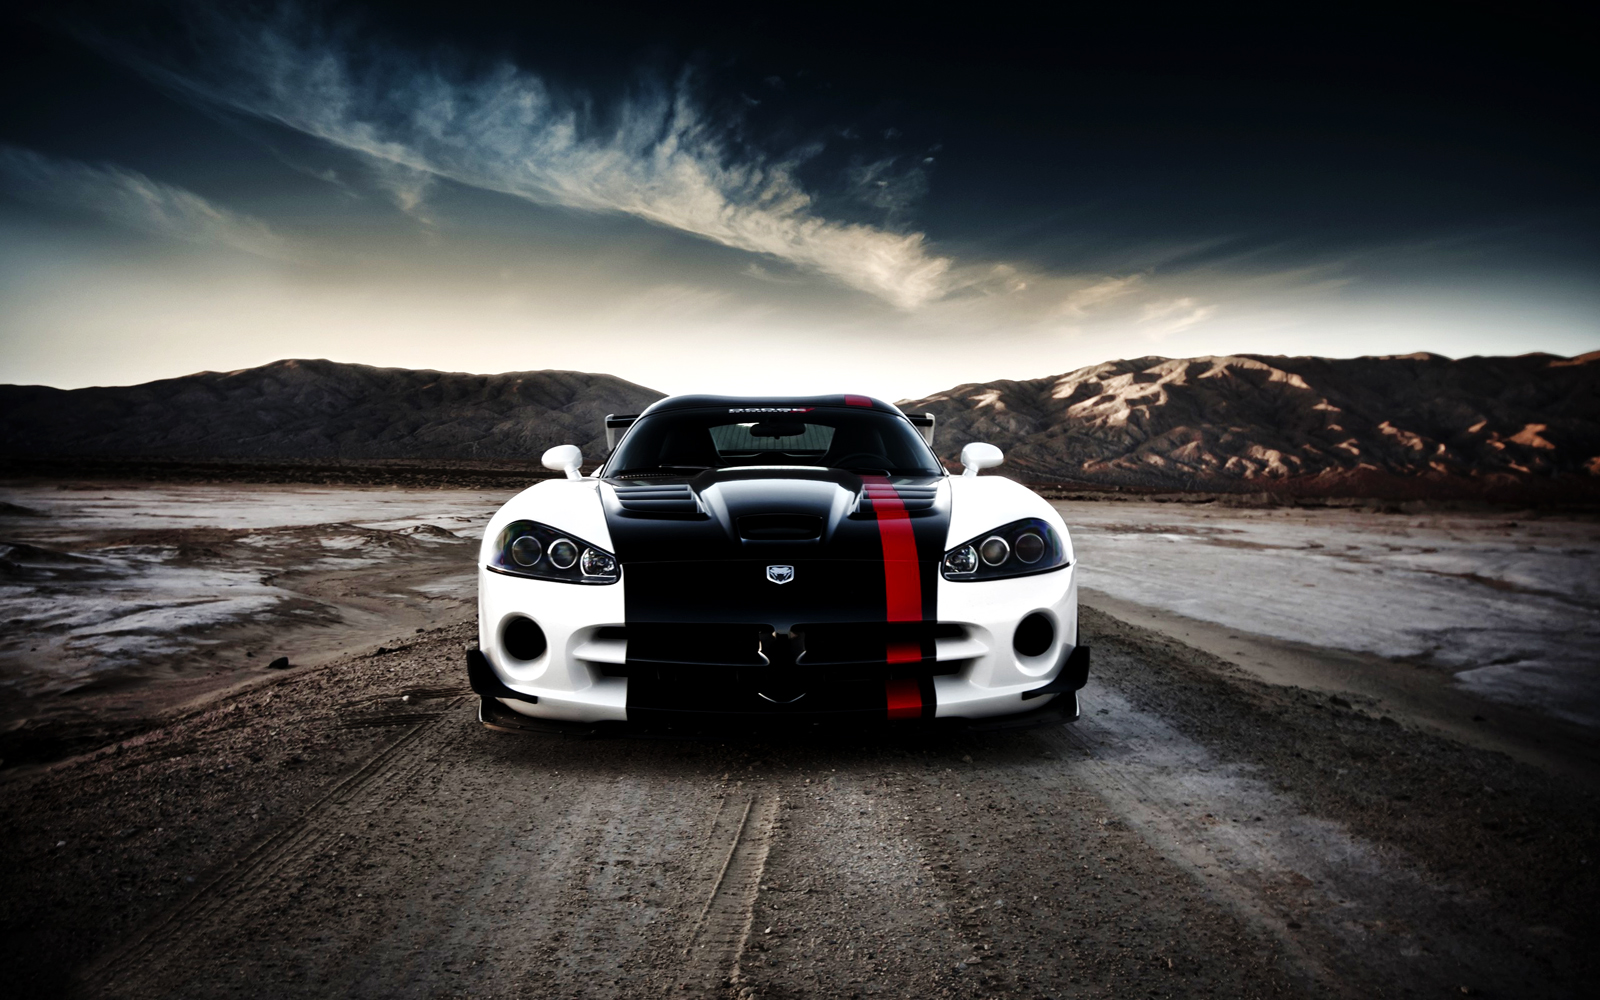 White Dodge Viper Acr HD Wallpapers Download Free Wallpapers in HD for